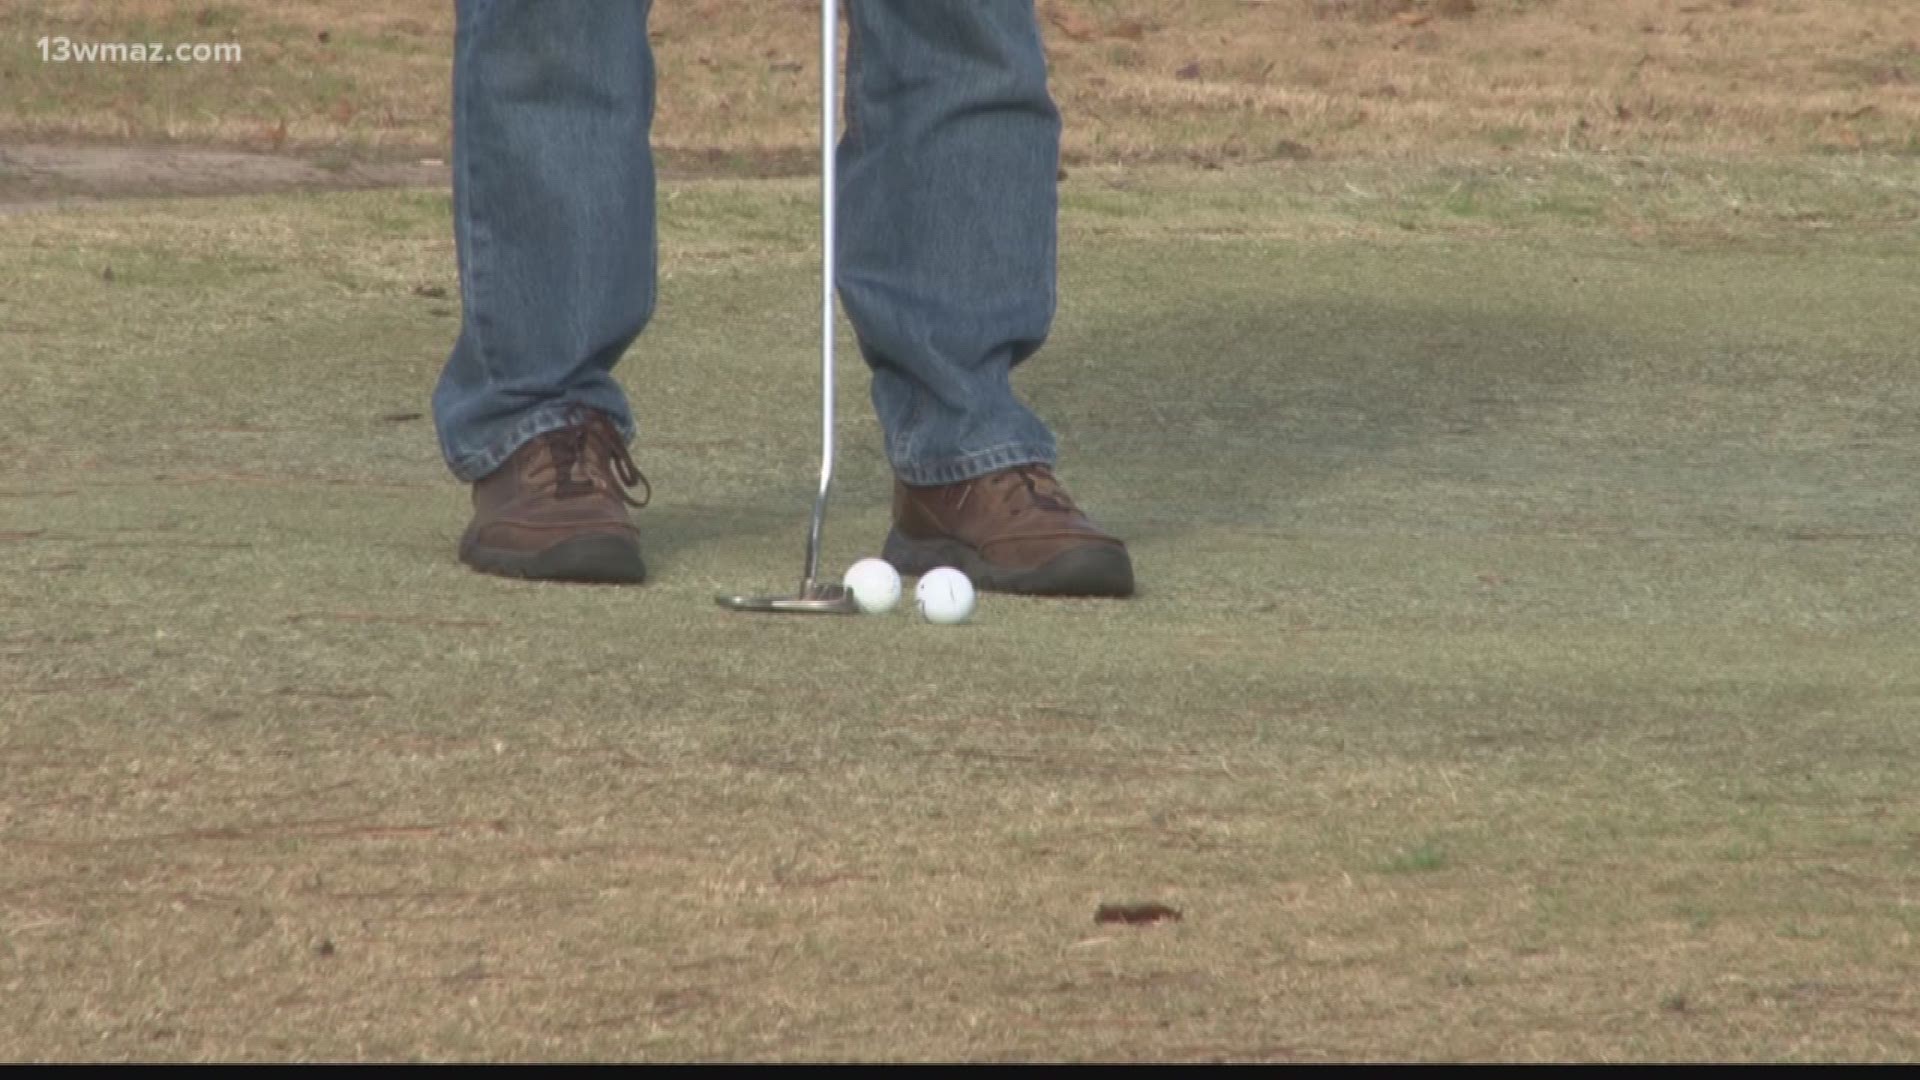 Changes coming to Macon's Bowden Golf Course